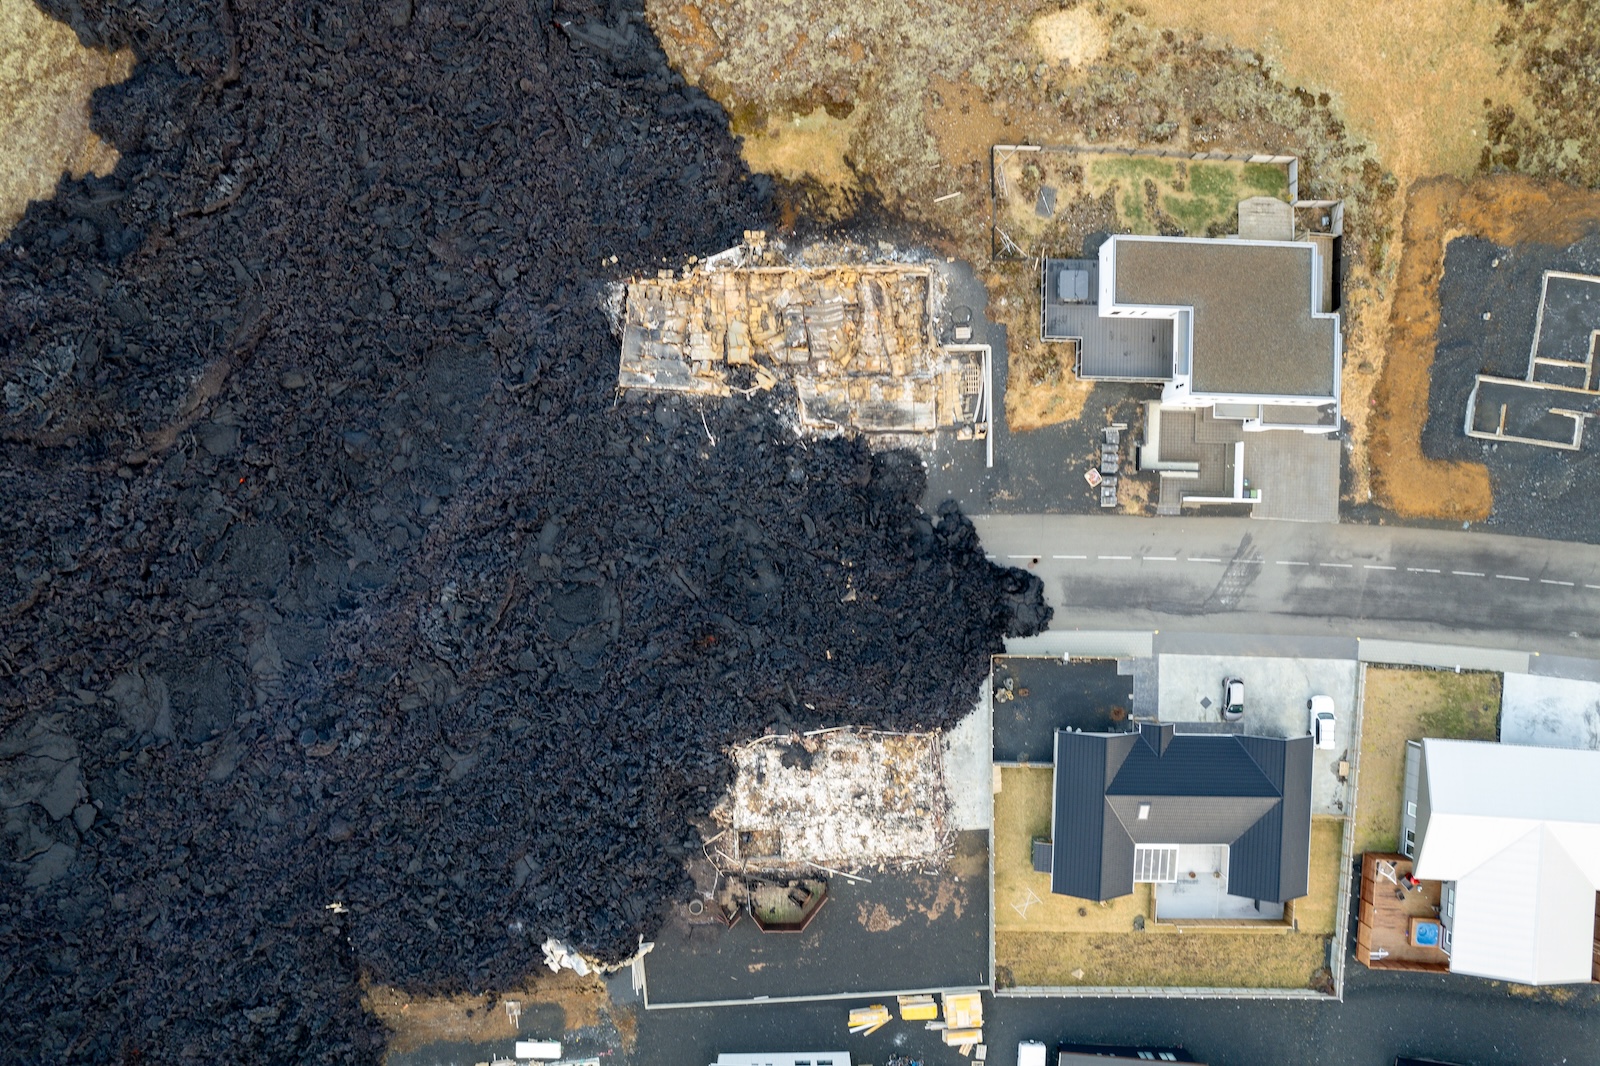 epa11079535 Image taken with a drone showing destroyed builings following lava explosions after a volcanic eruption near the town of Grindavik, in the Reykjanes peninsula, southwestern Iceland, 15 January 2024. A volcanic eruption began north of the town of Grindavik on the Reykjanes peninsula on 14 January, prompting authorities in Iceland to evacuate the small fishing town in the early morning as a precaution. The eruption is not expected to impact additional populated areas and does not present a 'threat to life', the Government of Iceland stated, adding that there are no disruptions to flights to and from Iceland. This is the second eruption in the area since December 2023, and the fifth since 2021.  EPA/ANTON BRINK